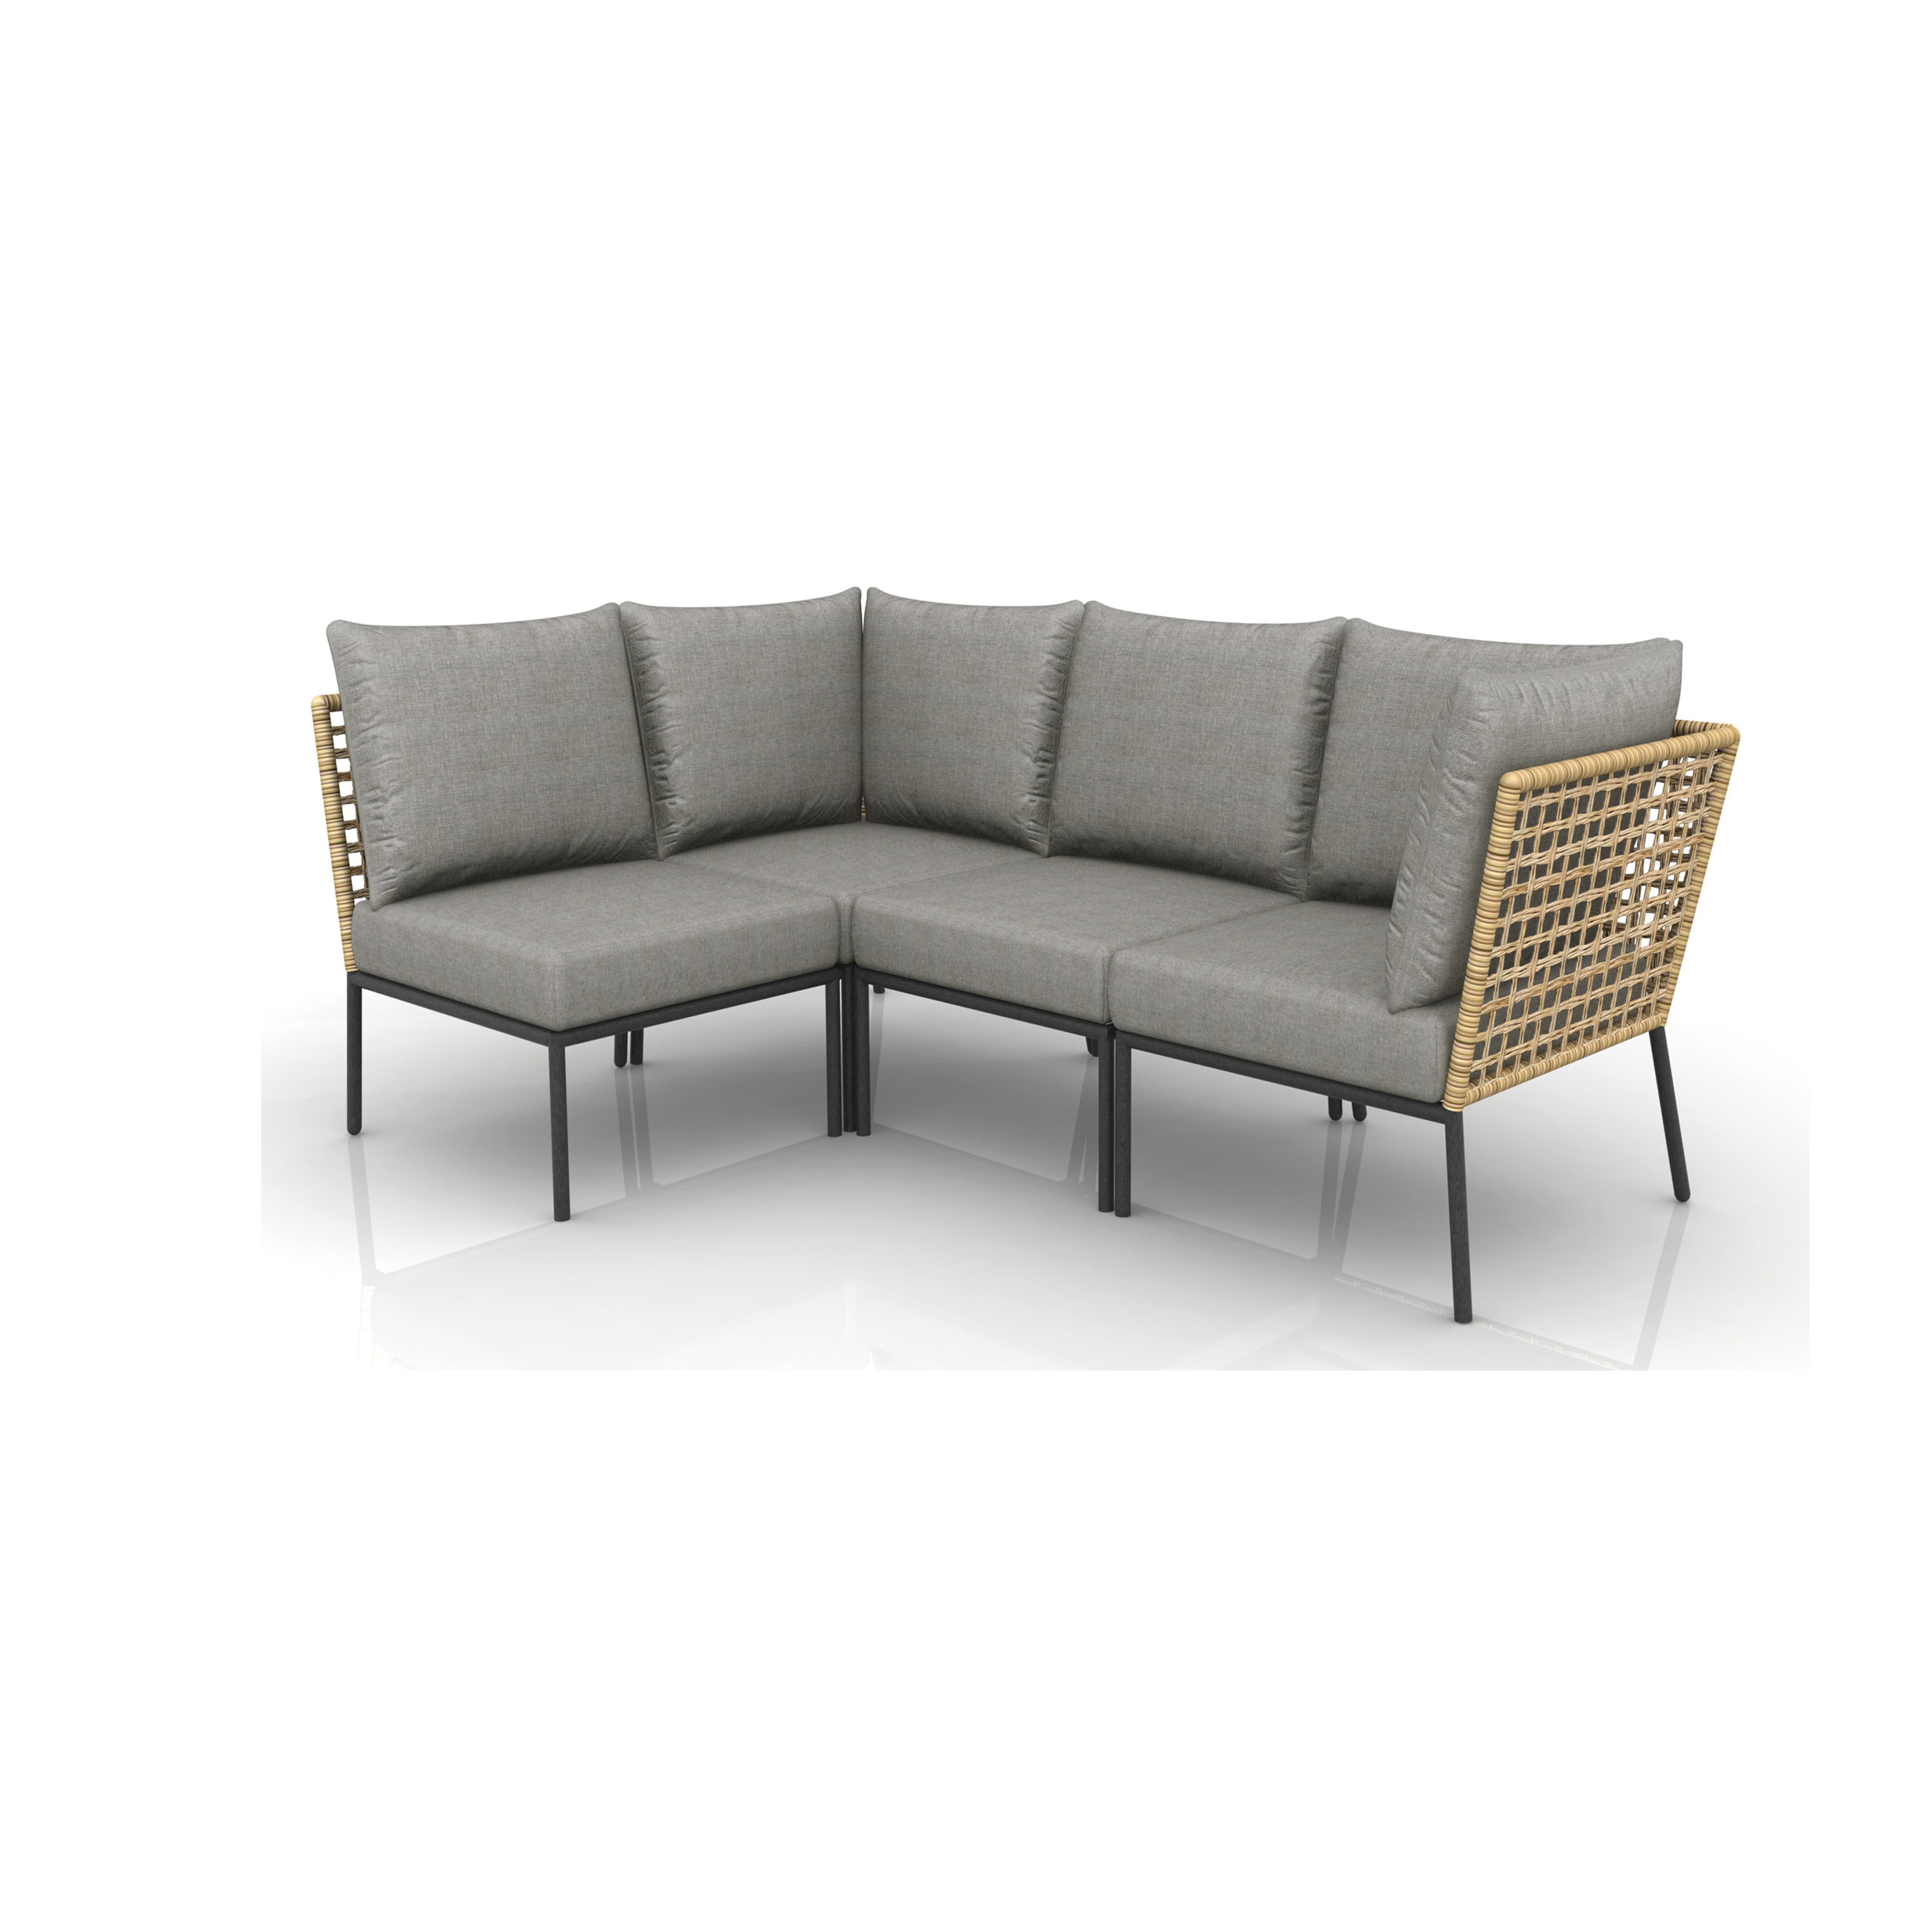 in department Conversation Patio Set Wicker Sets Conversation with Cushions the at Patio Gray Origin 21 Clairmont 4-Piece